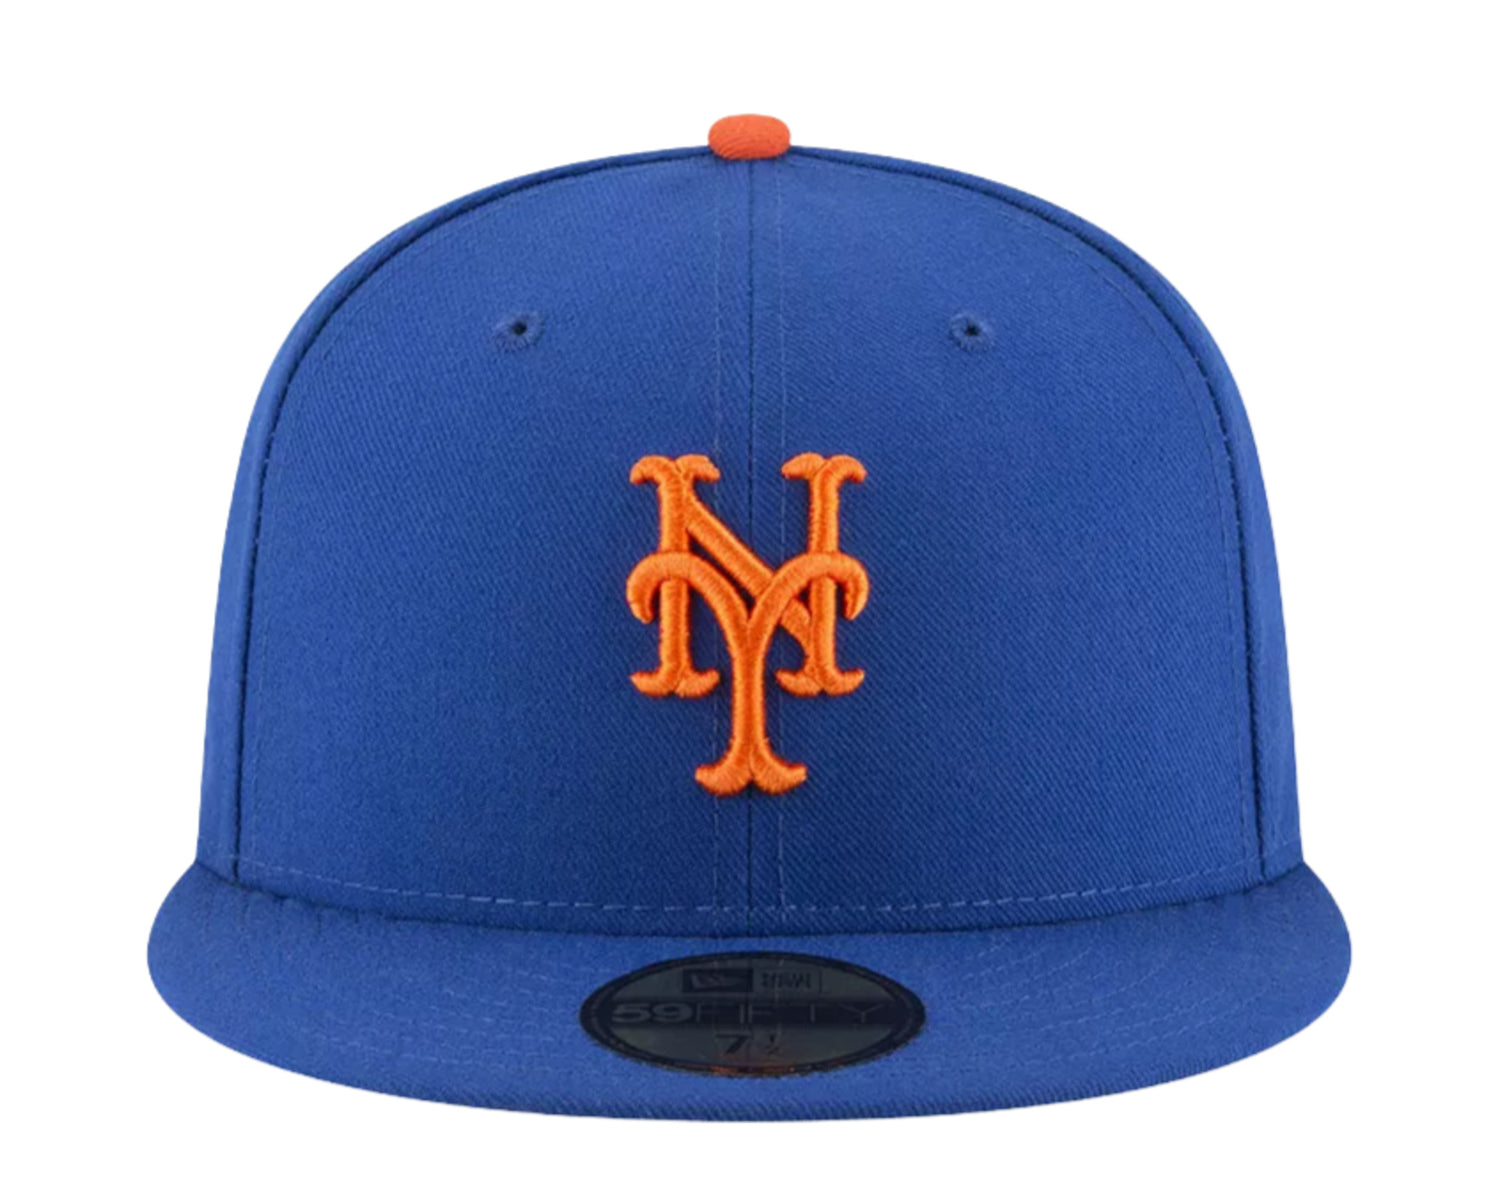 New Era 59Fifty MLB New York Mets 9/11 Memorial Fitted Hat